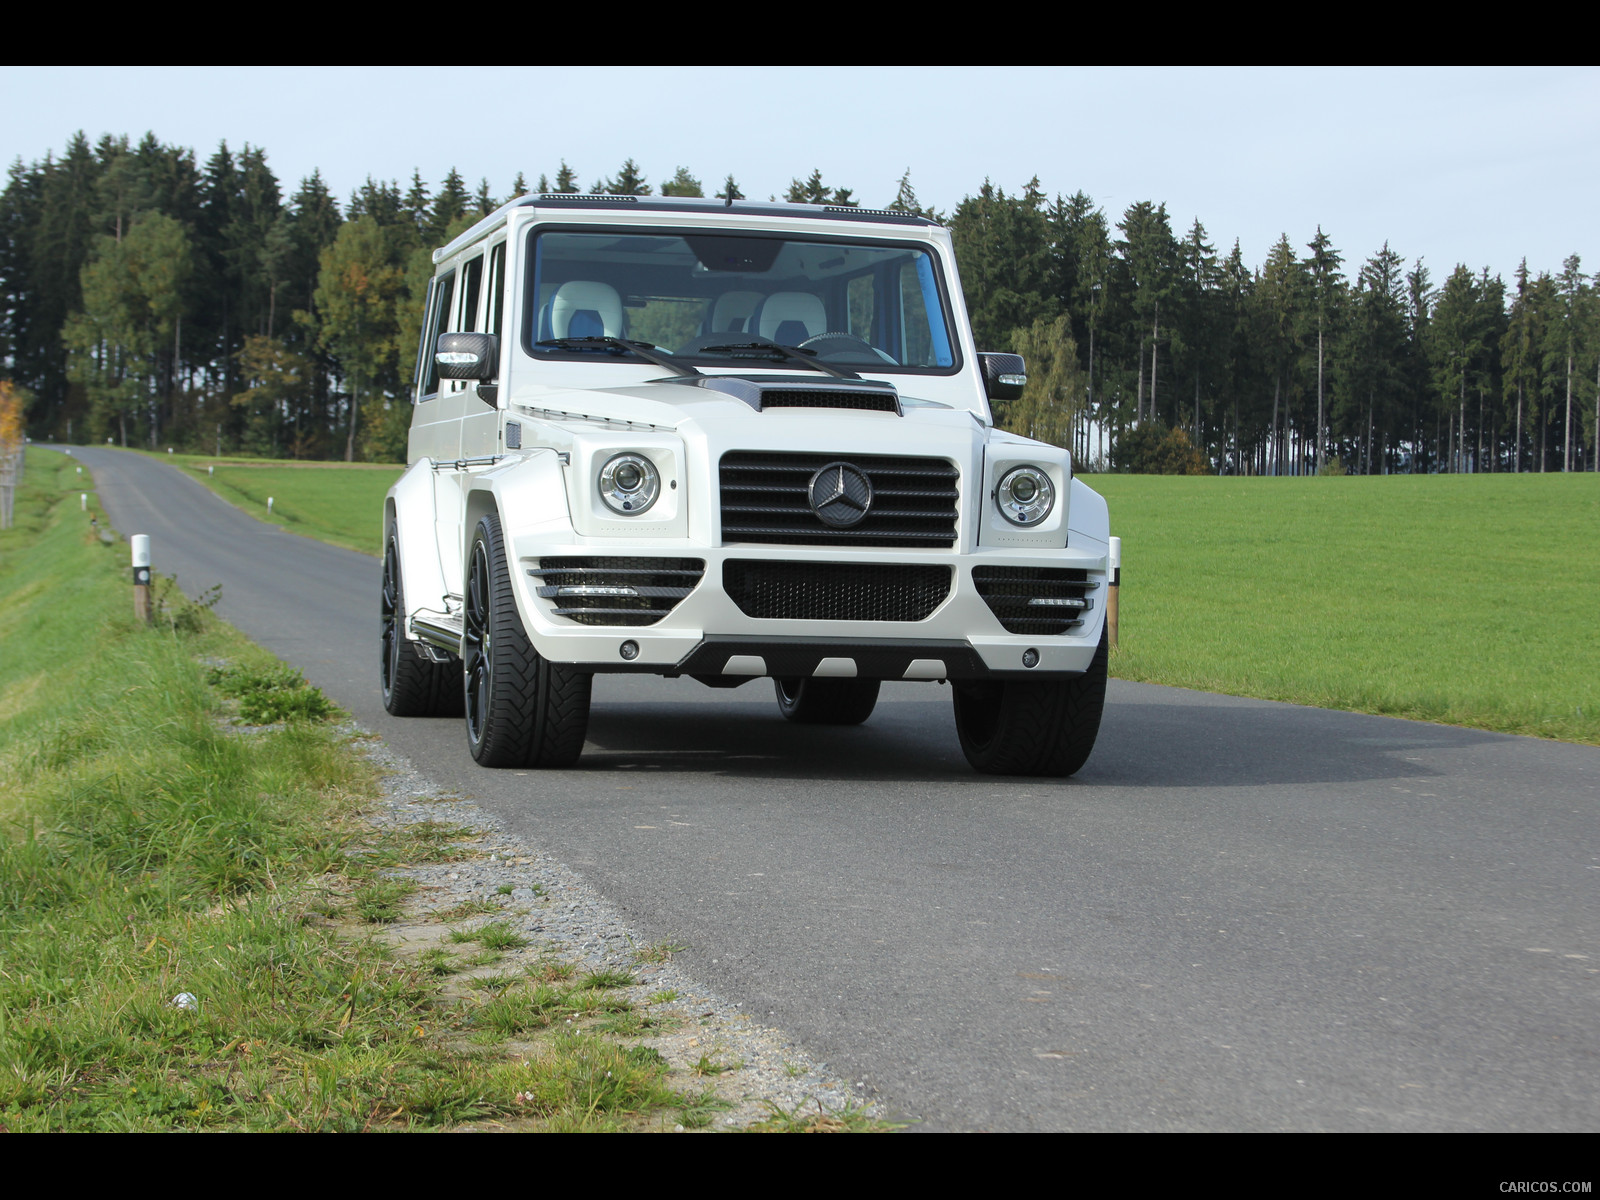 Mansory G-Couture based on Mercedes G-Class White - Front, #20 of 39